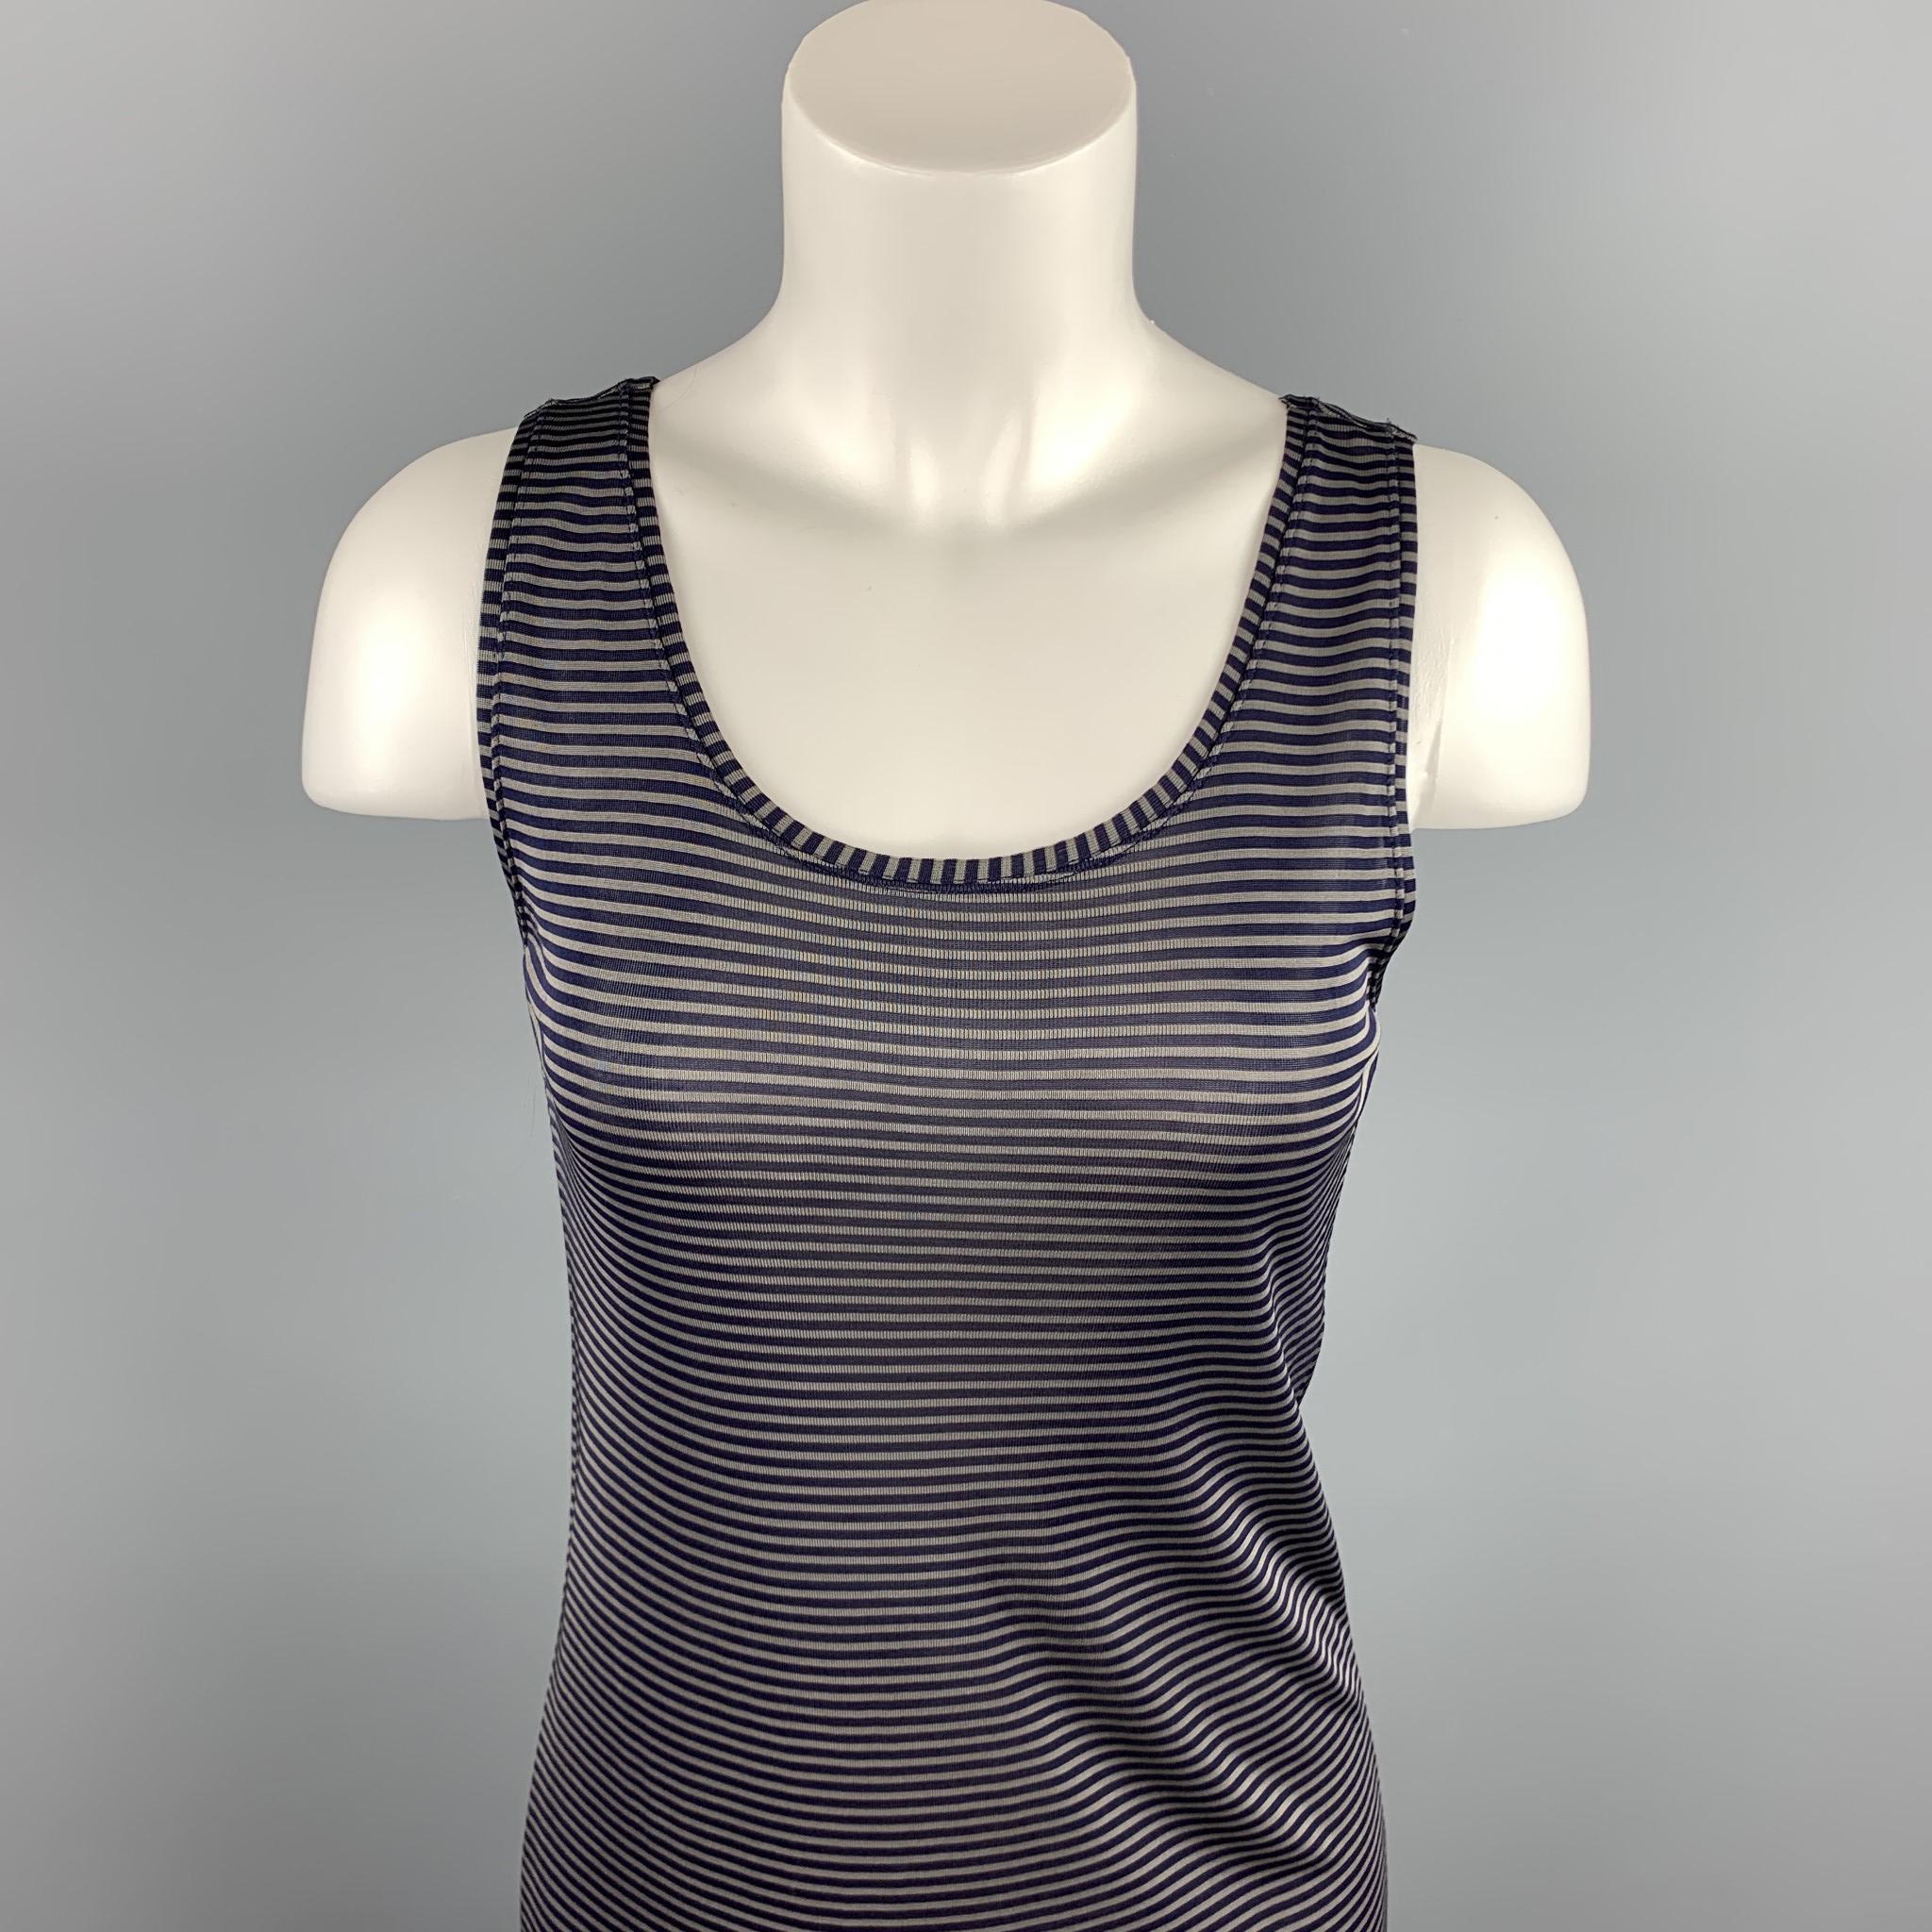 DRIES VAN NOTEN tank dress comes in a navy stripe jersey viscose featuring a round neck. 

Excellent Pre-Owned Condition.
Marked: S

Measurements:

Shoulder: 13.5 in. 
Bust: 28 in. 
Hip: 32 in. 
Length: 33 in. 

SKU: 90077
Category: Dress

More